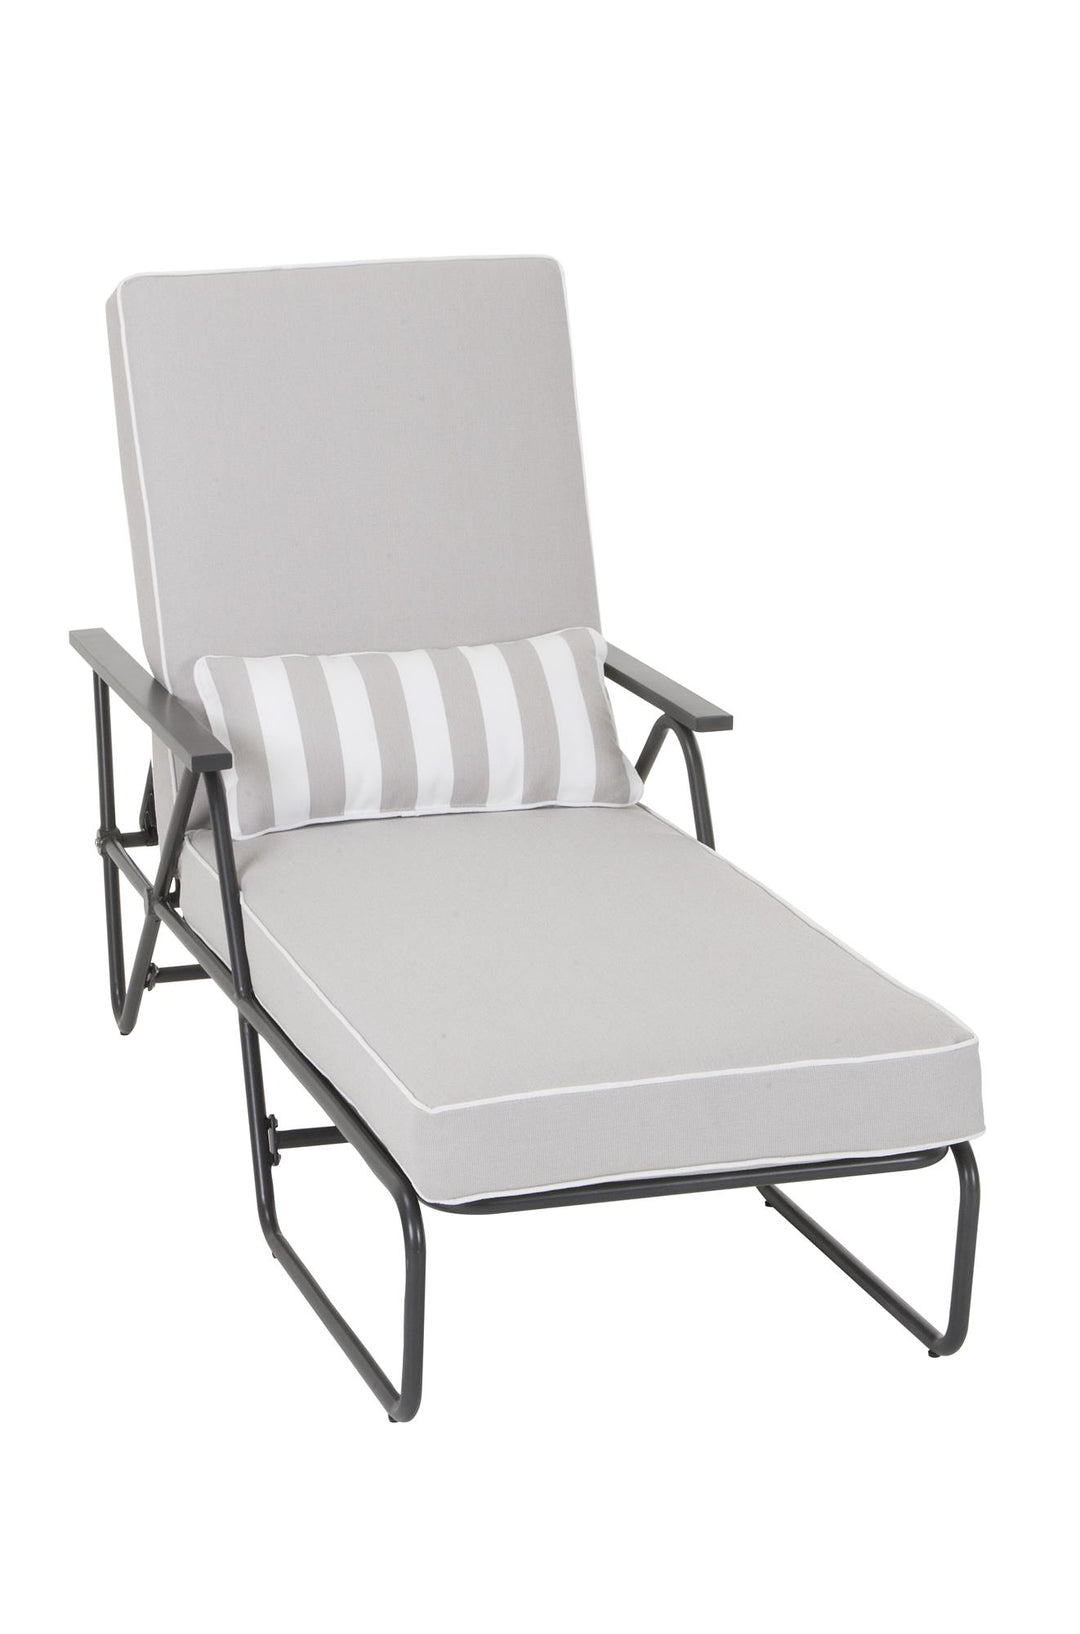 Connie Outdoor Chaise Lounge - Gray